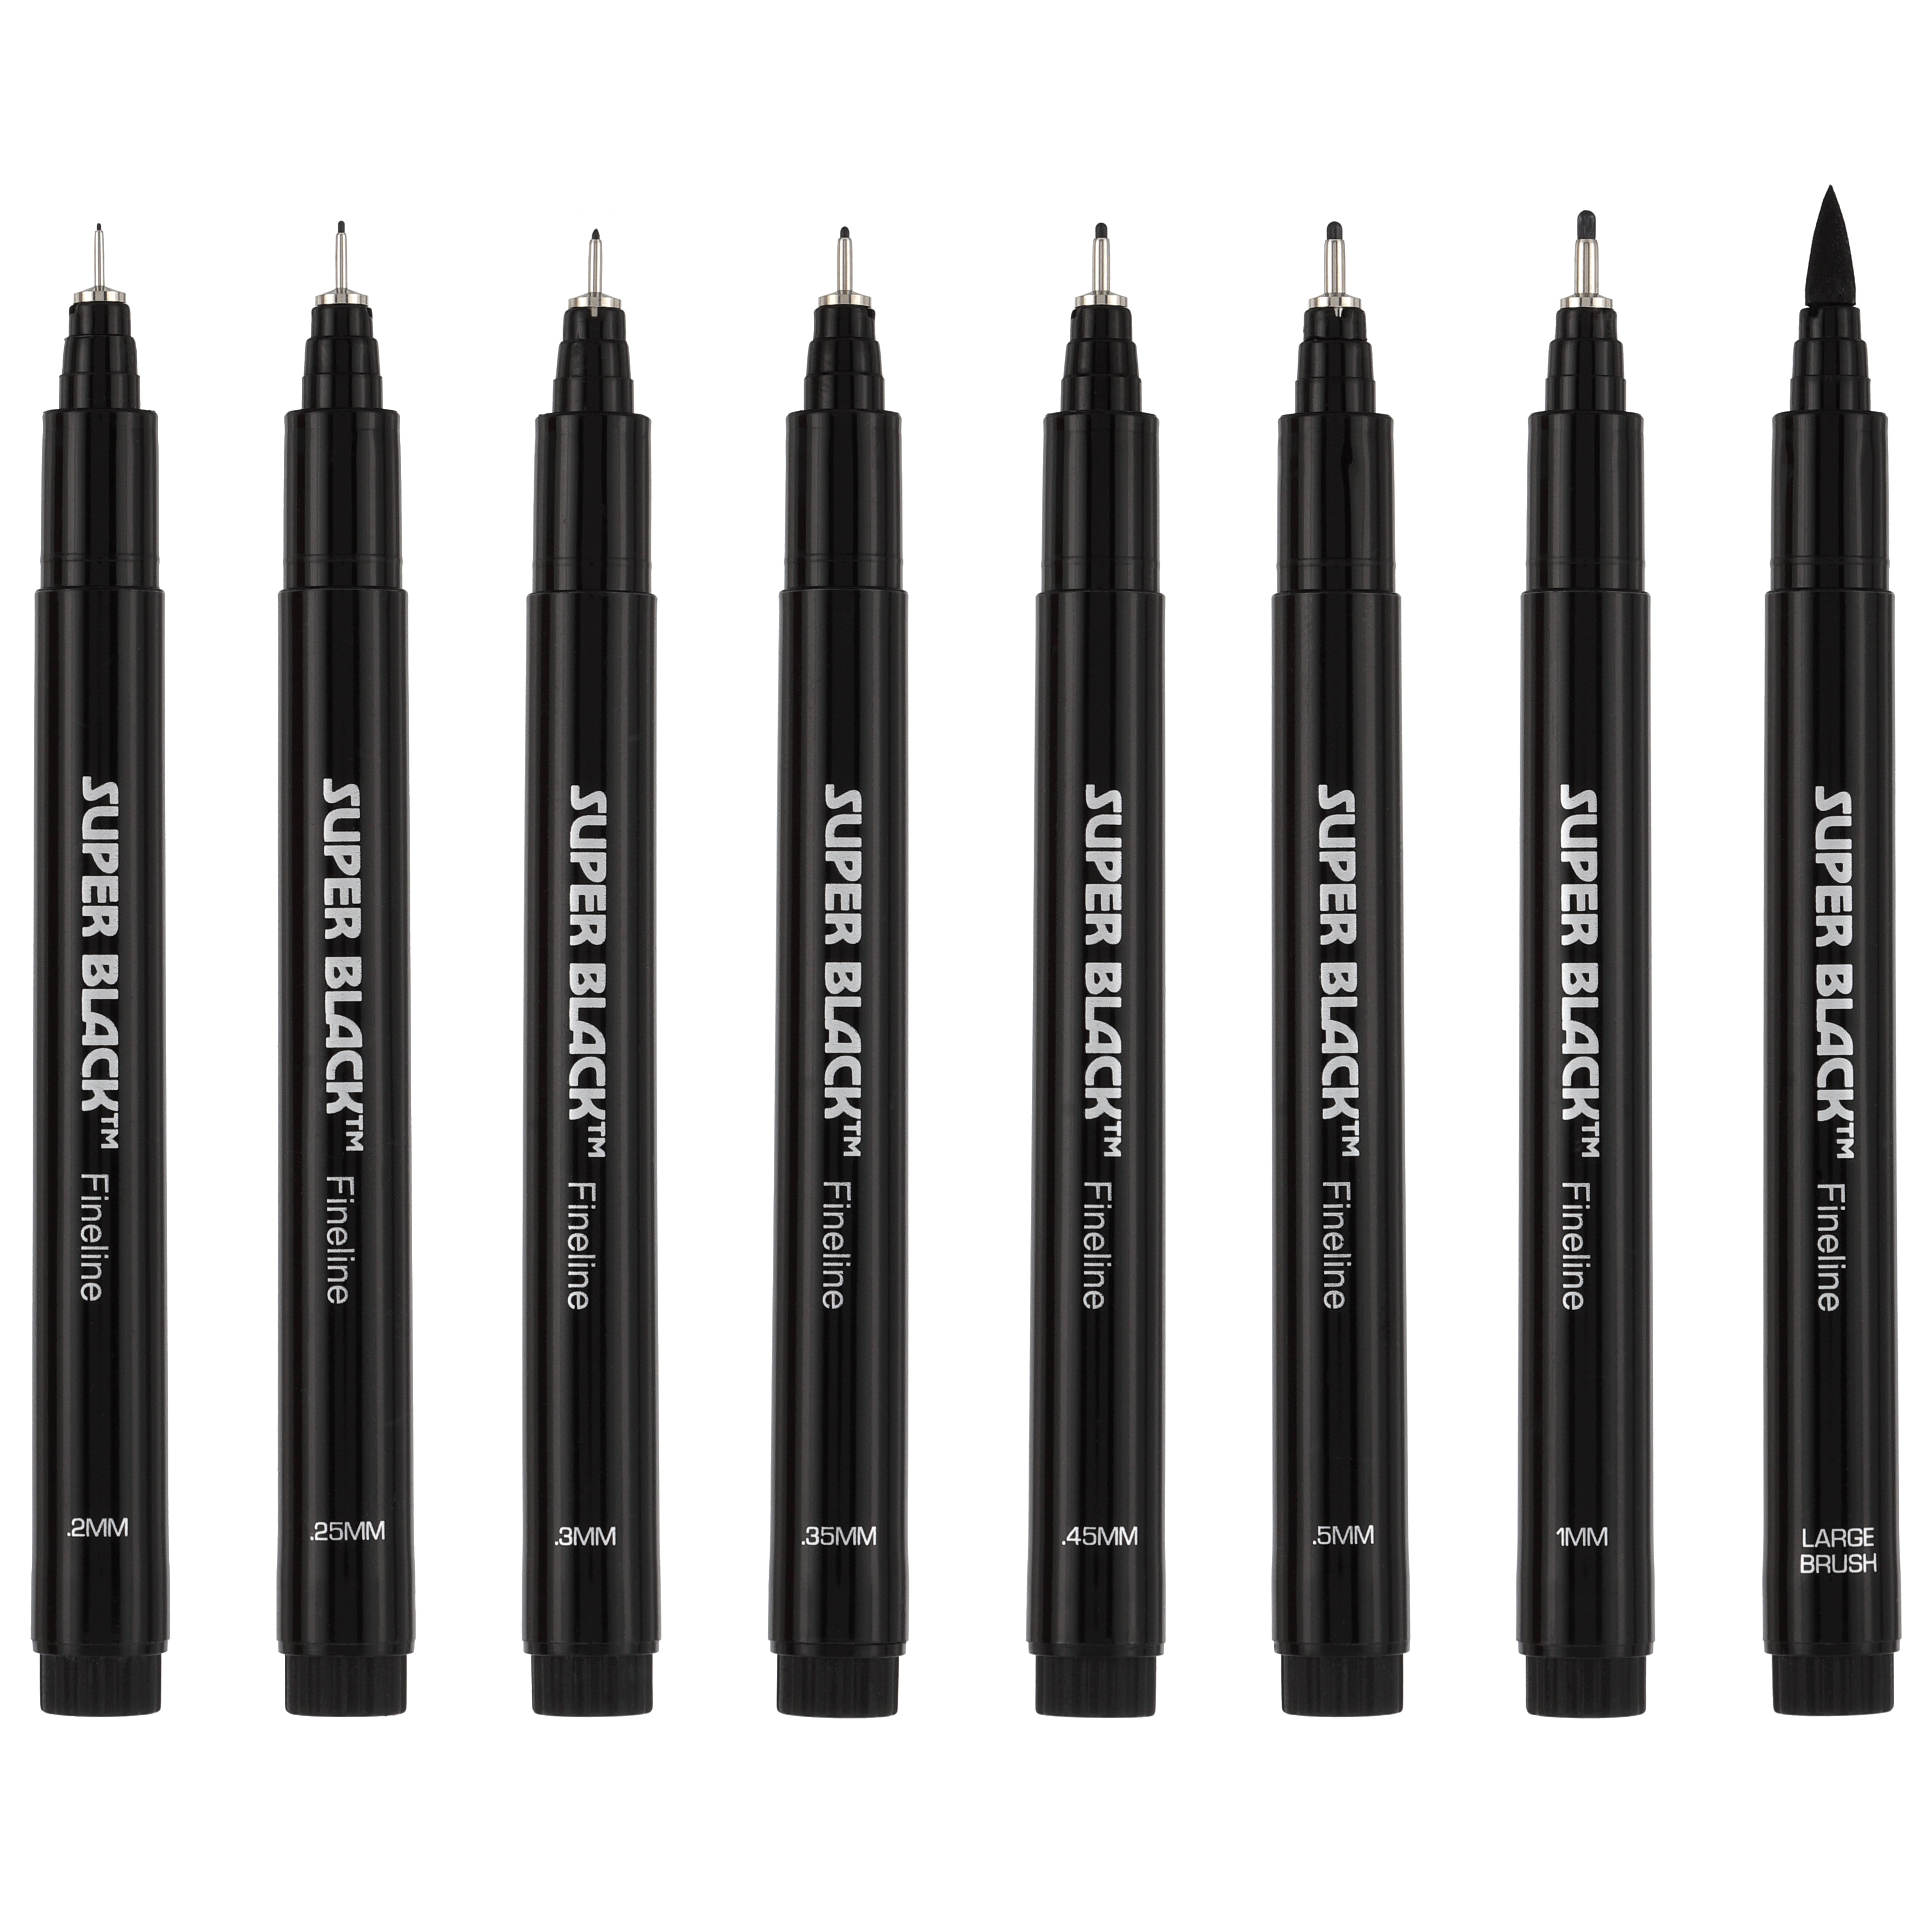 Sunacme Art Supplier Dual Brush Markers Pen Review, can stimulate